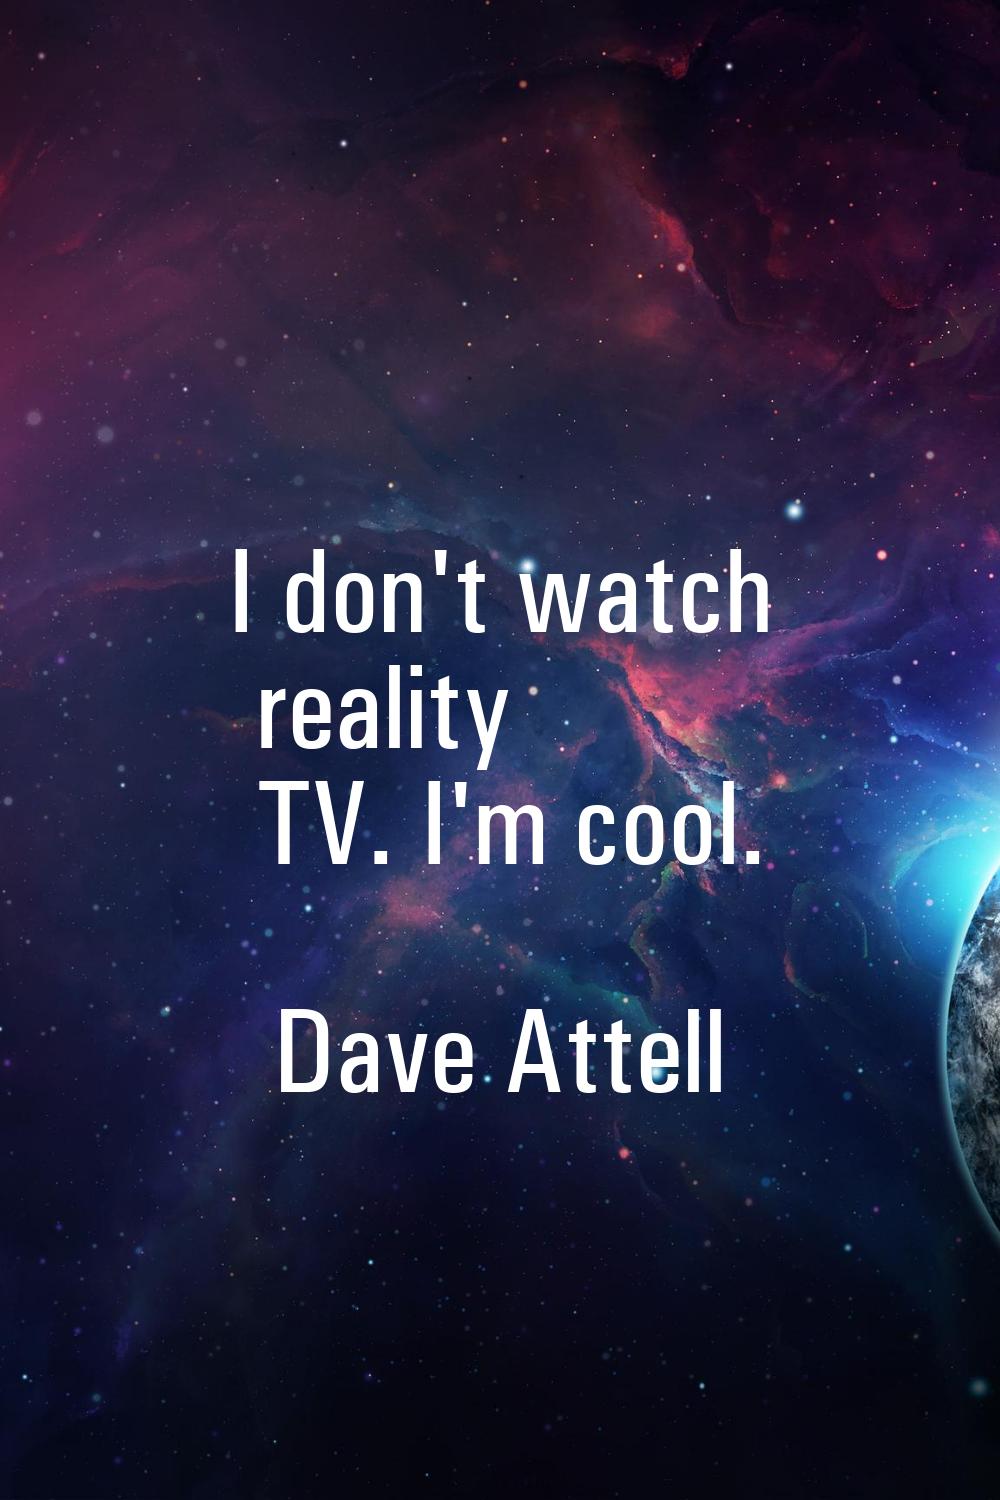 I don't watch reality TV. I'm cool.